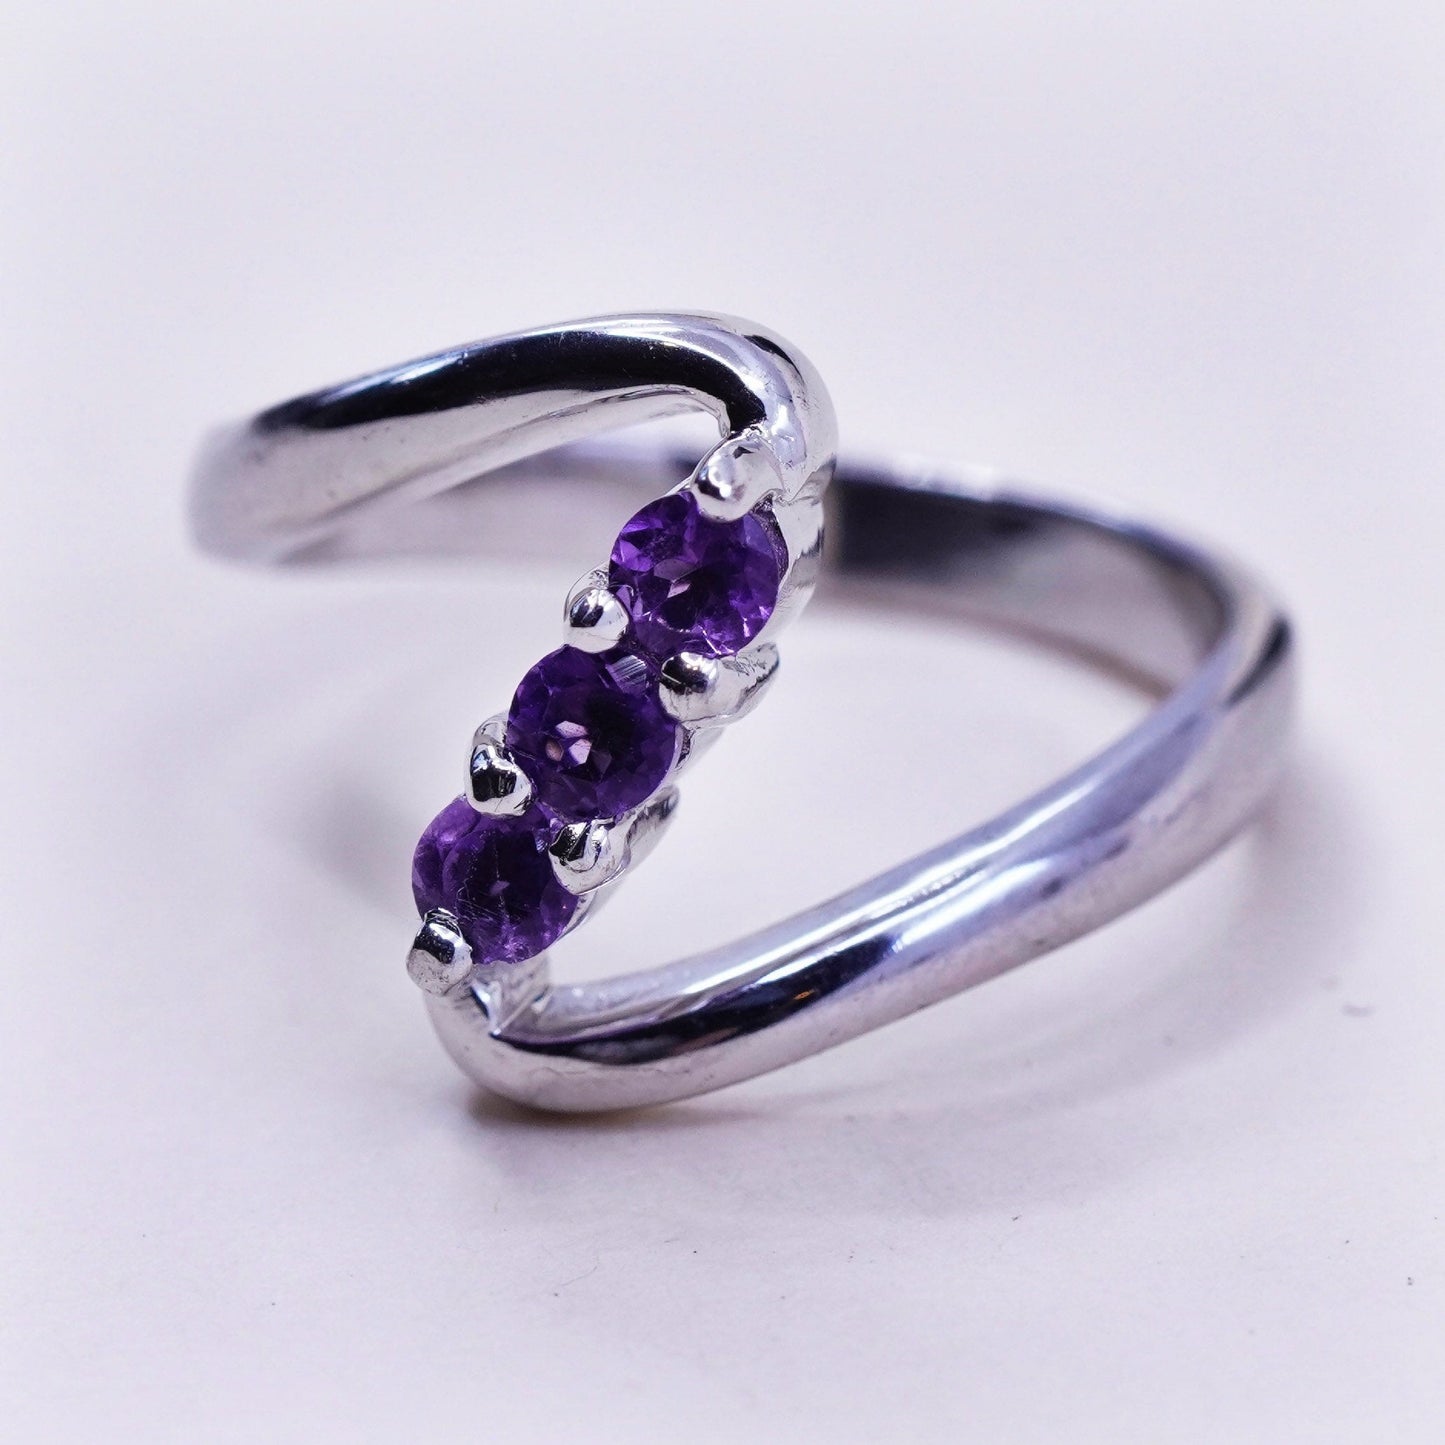 Size 7.25, vintage Sterling silver handmade ring, wavy 925 with amethyst stone